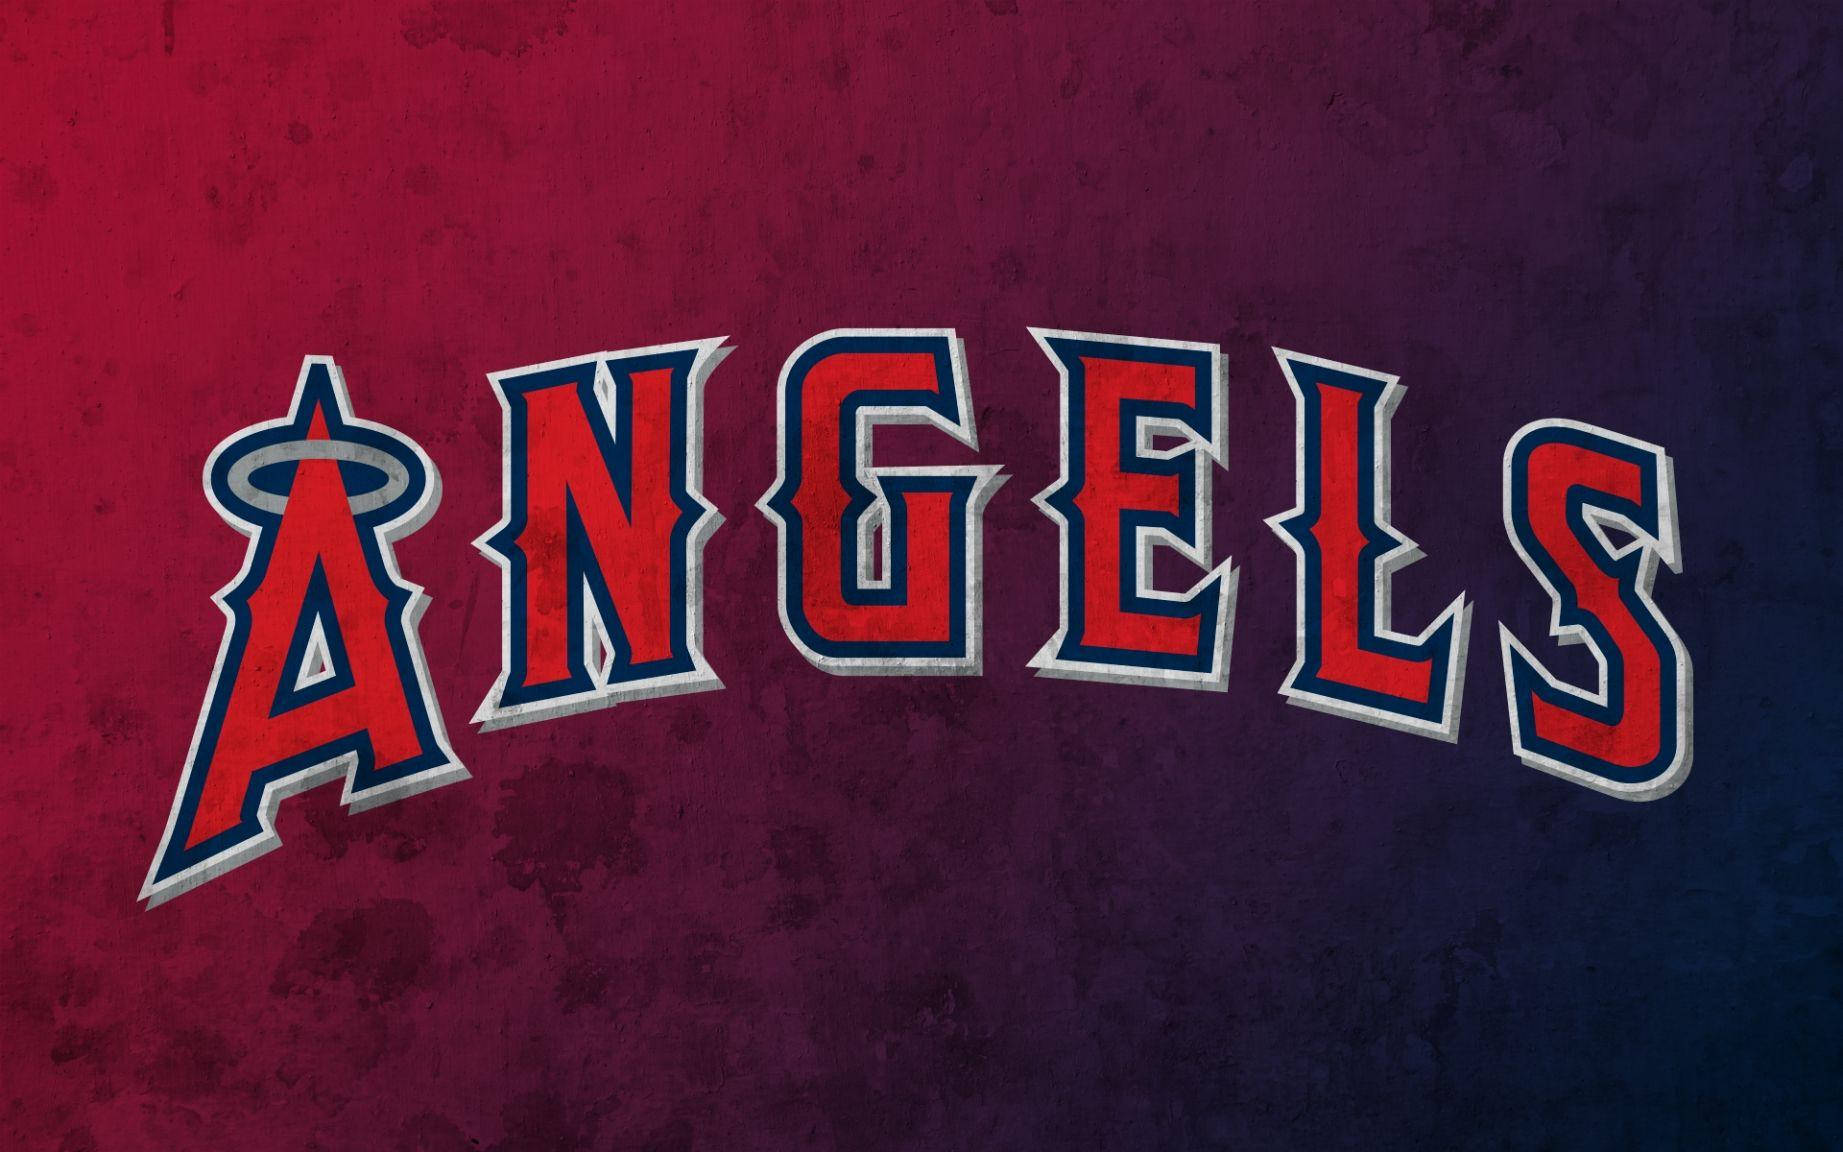 Los Angeles Angels Logo On Red And Blue Background